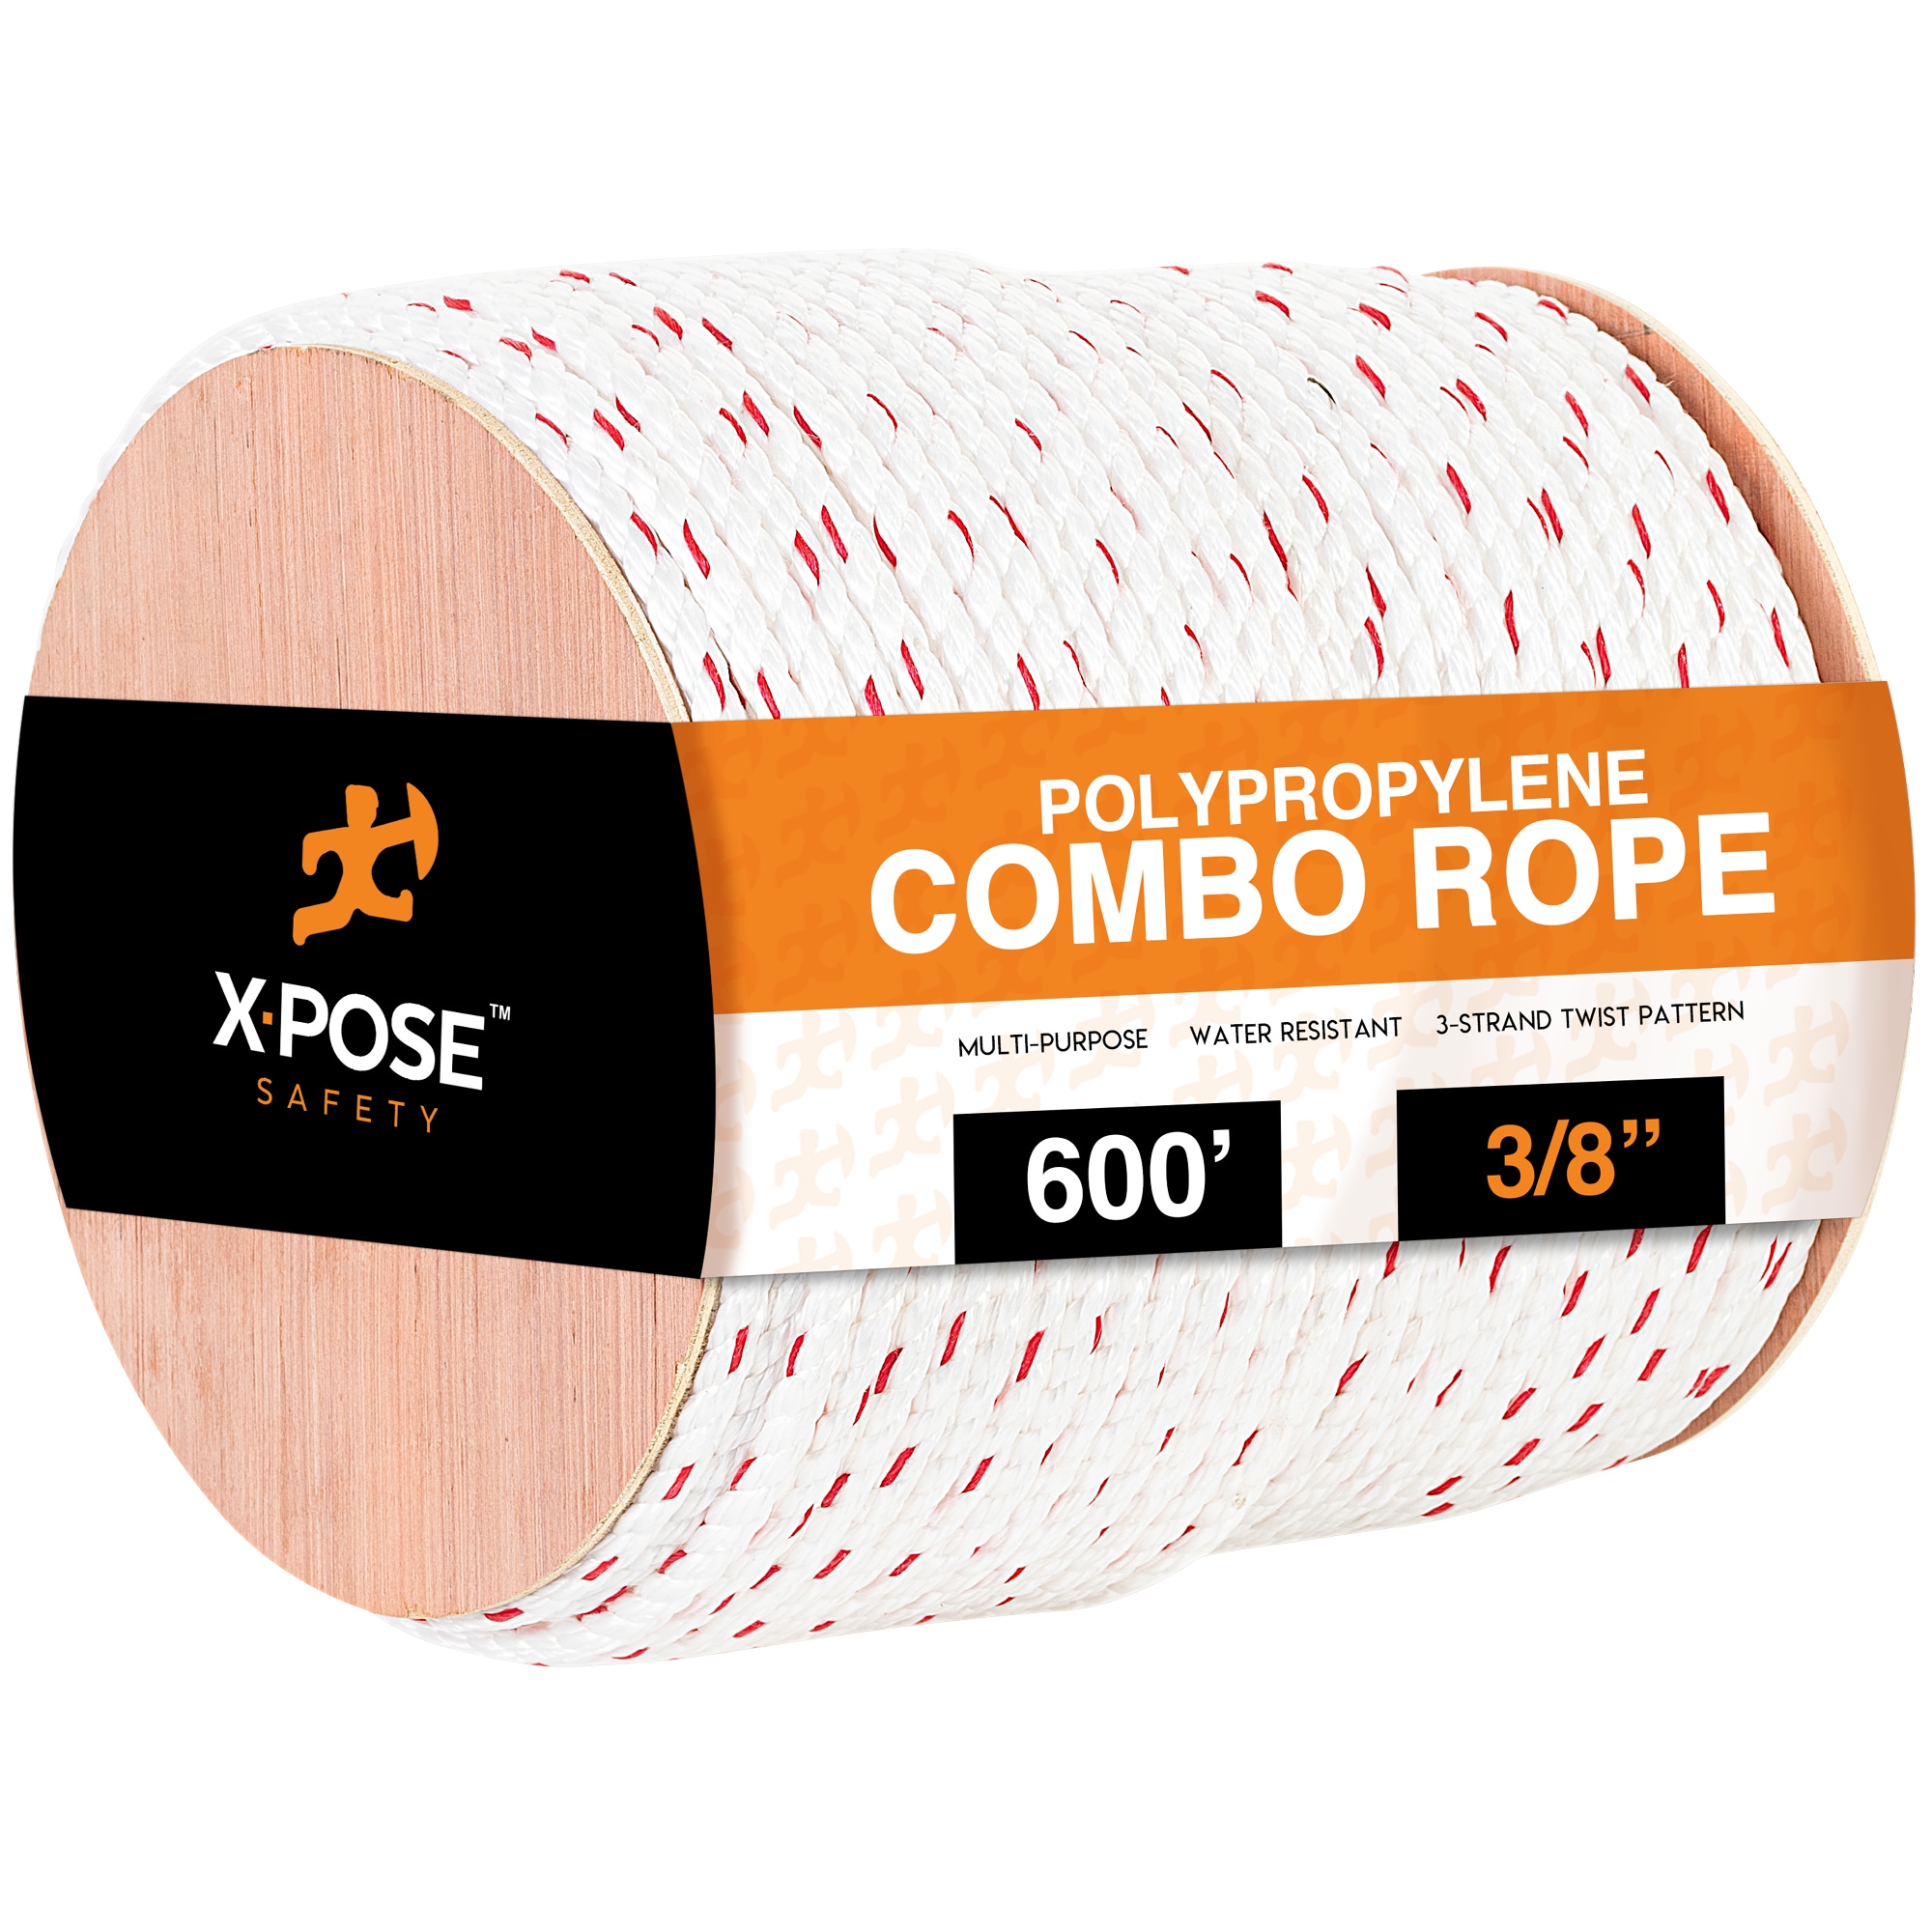 XPOSE SAFETY Poly Combo 3 Strand Safety Rope - 3/8 Inch x 600 Ft UV Coated  Polypropylene Rope - for Fall Protection, Ladder Safety, Climbing, Arborist  Rigging Equipment, Roofing Harness - by Xpose Safety at